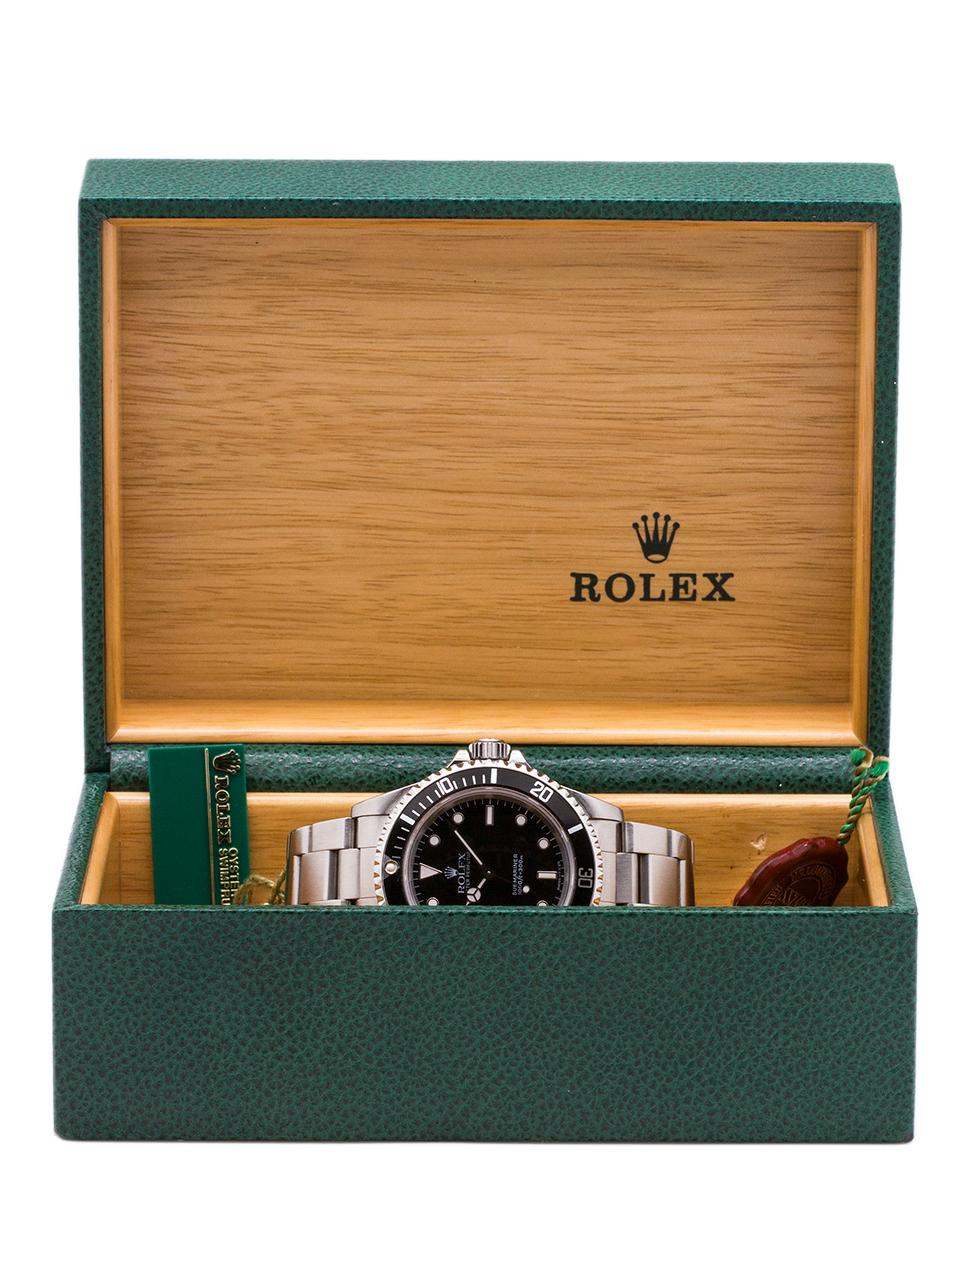 Rolex Submariner Ref 14060 Stainless Steel circa 1998 Box and Papers 1